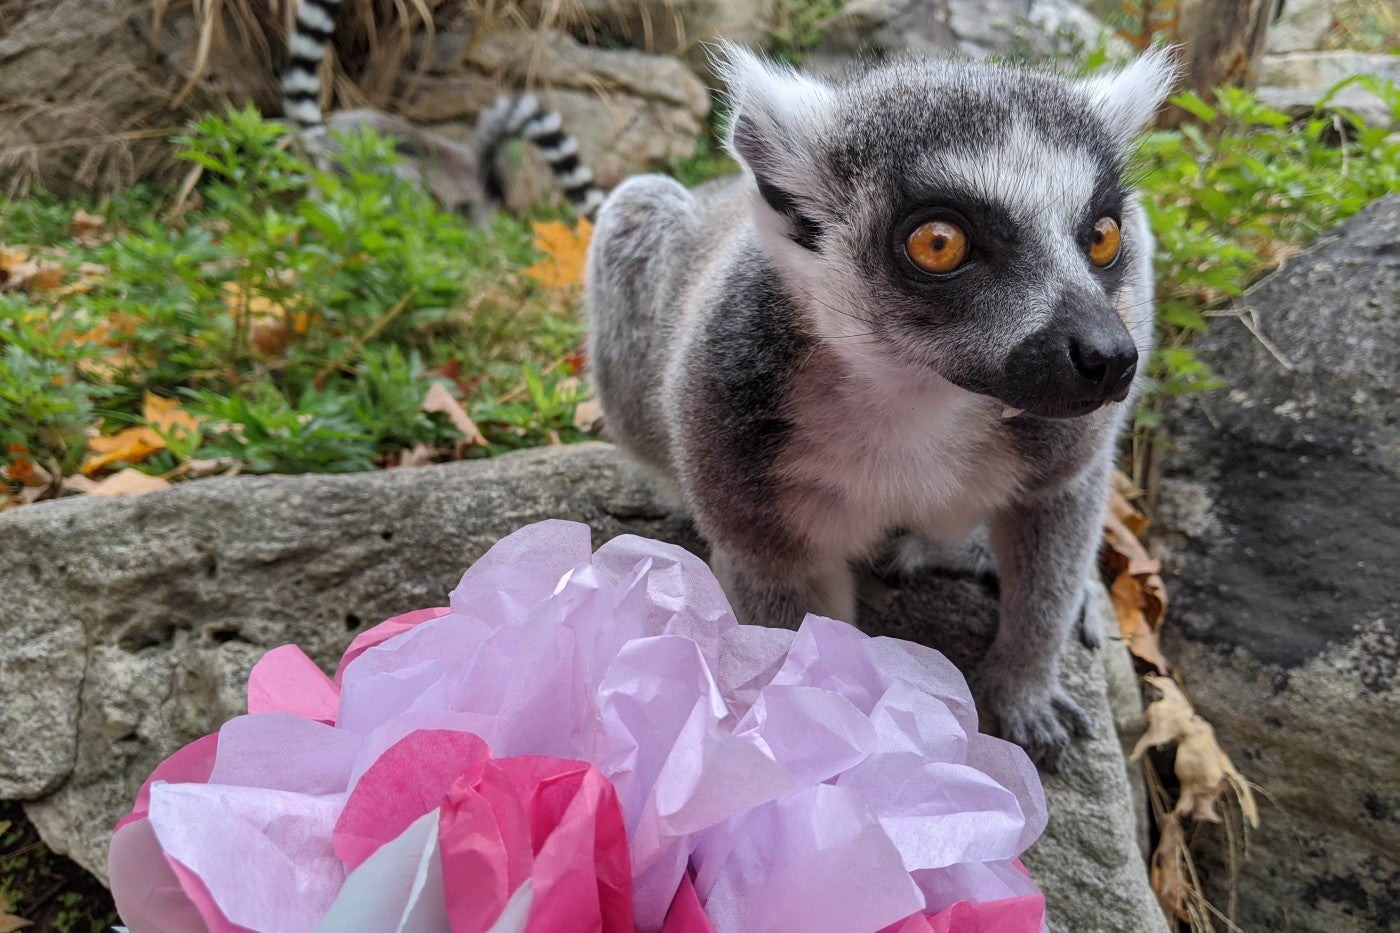 Ring-tailed lemur Southside Johnny sits next to a large flower made of pink tissue paper.